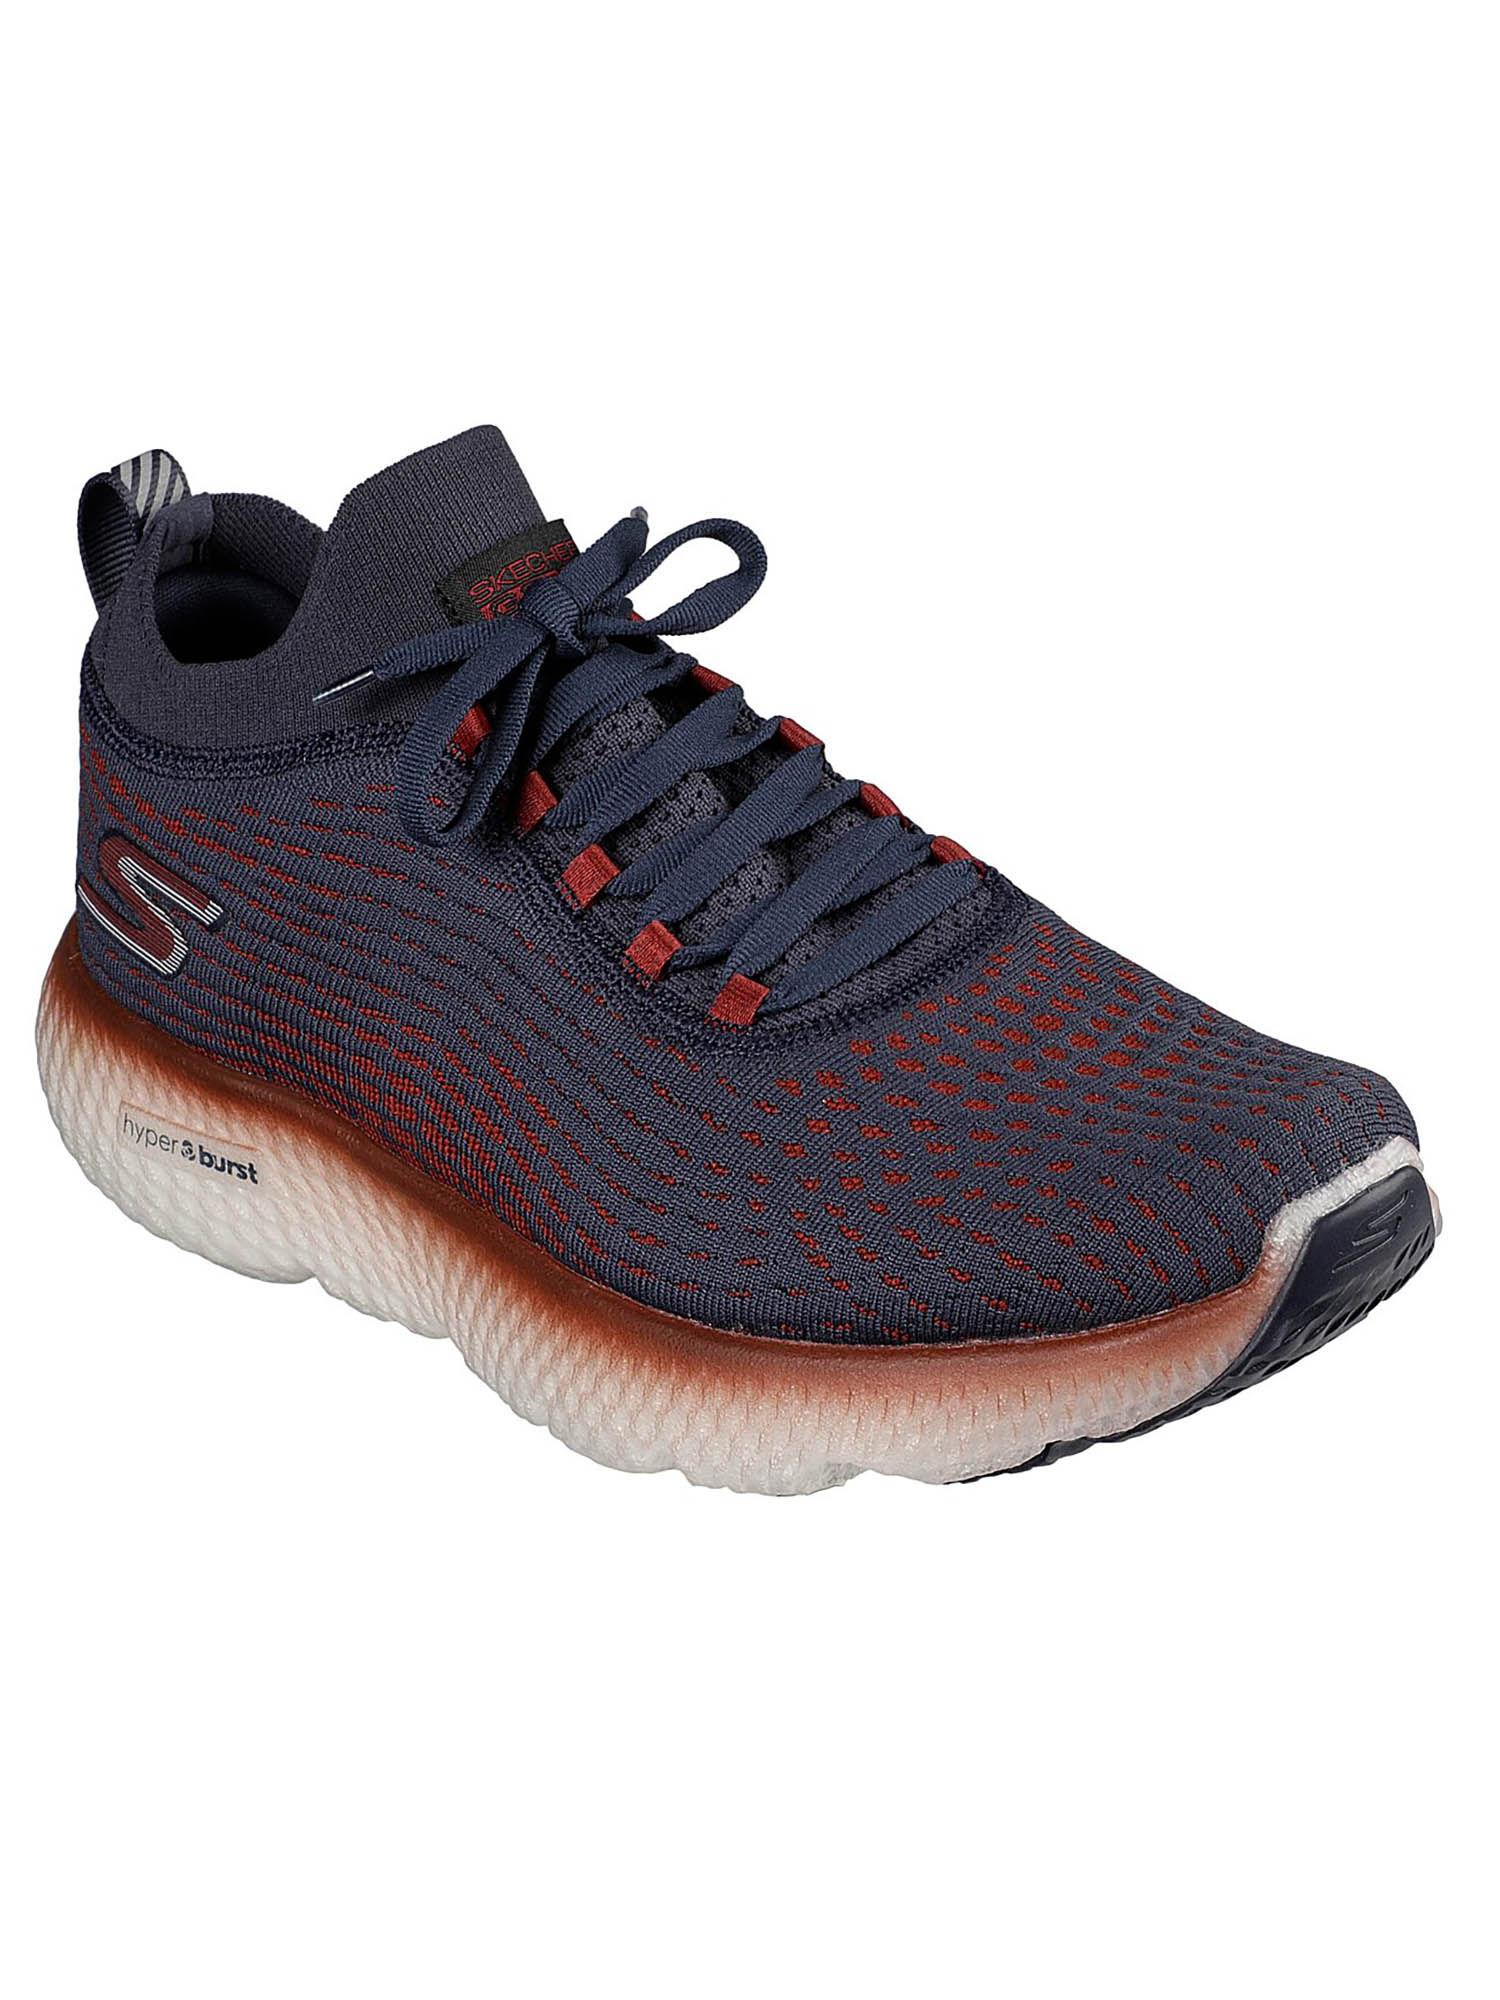 max road 4 navy blue running shoes